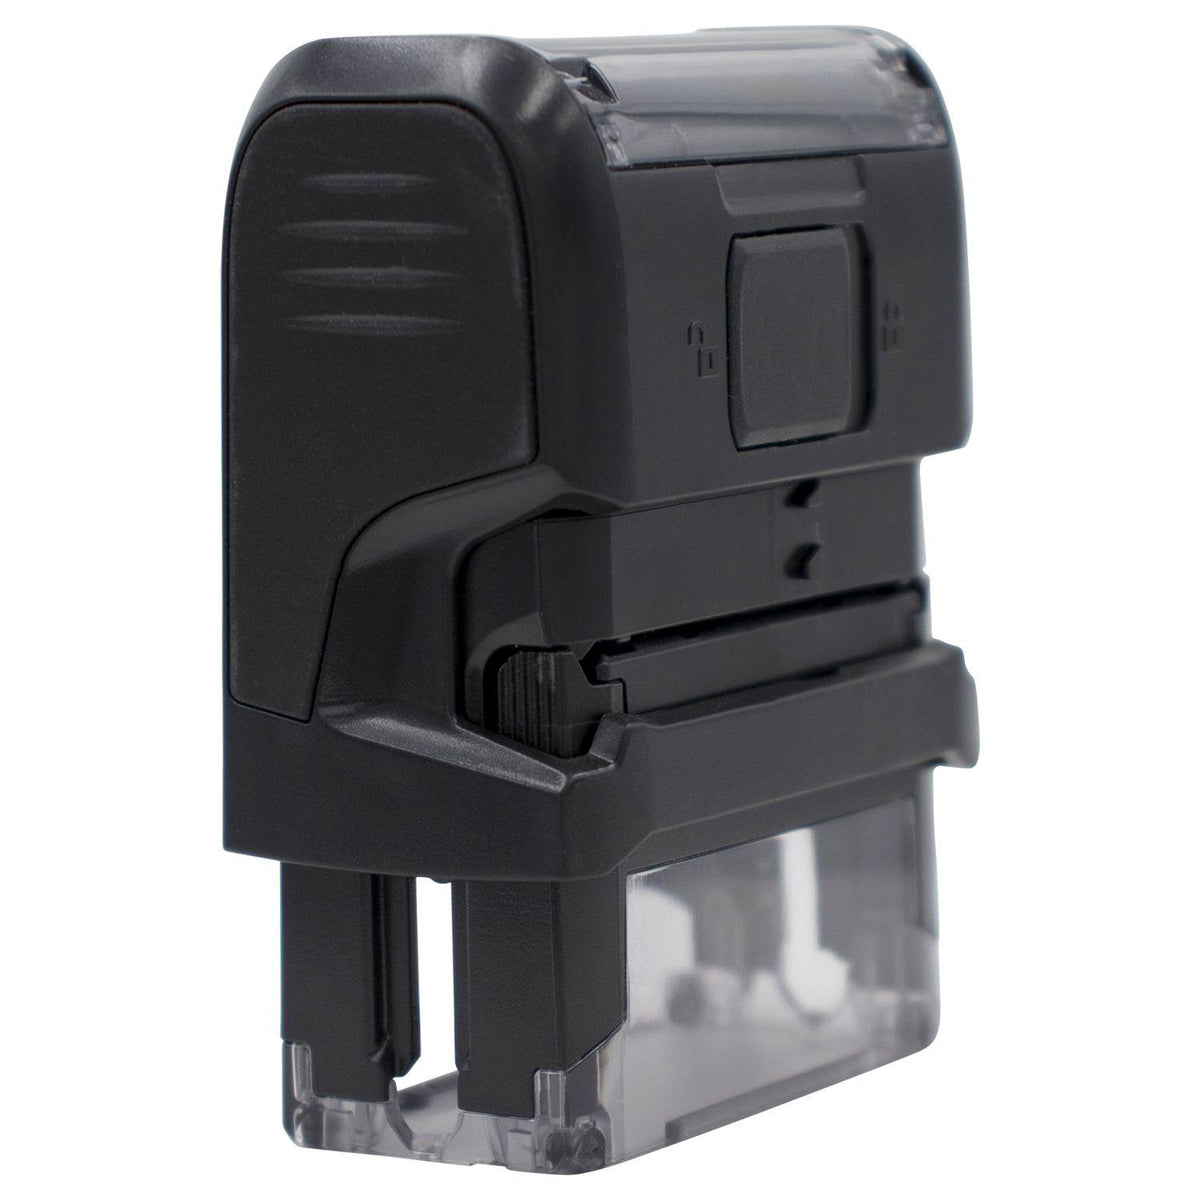 Large Self-Inking Temporarily Closed Stamp - Engineer Seal Stamps - Brand_Trodat, Impression Size_Large, Stamp Type_Self-Inking Stamp, Type of Use_Business, Type of Use_General, Type of Use_Medical Office